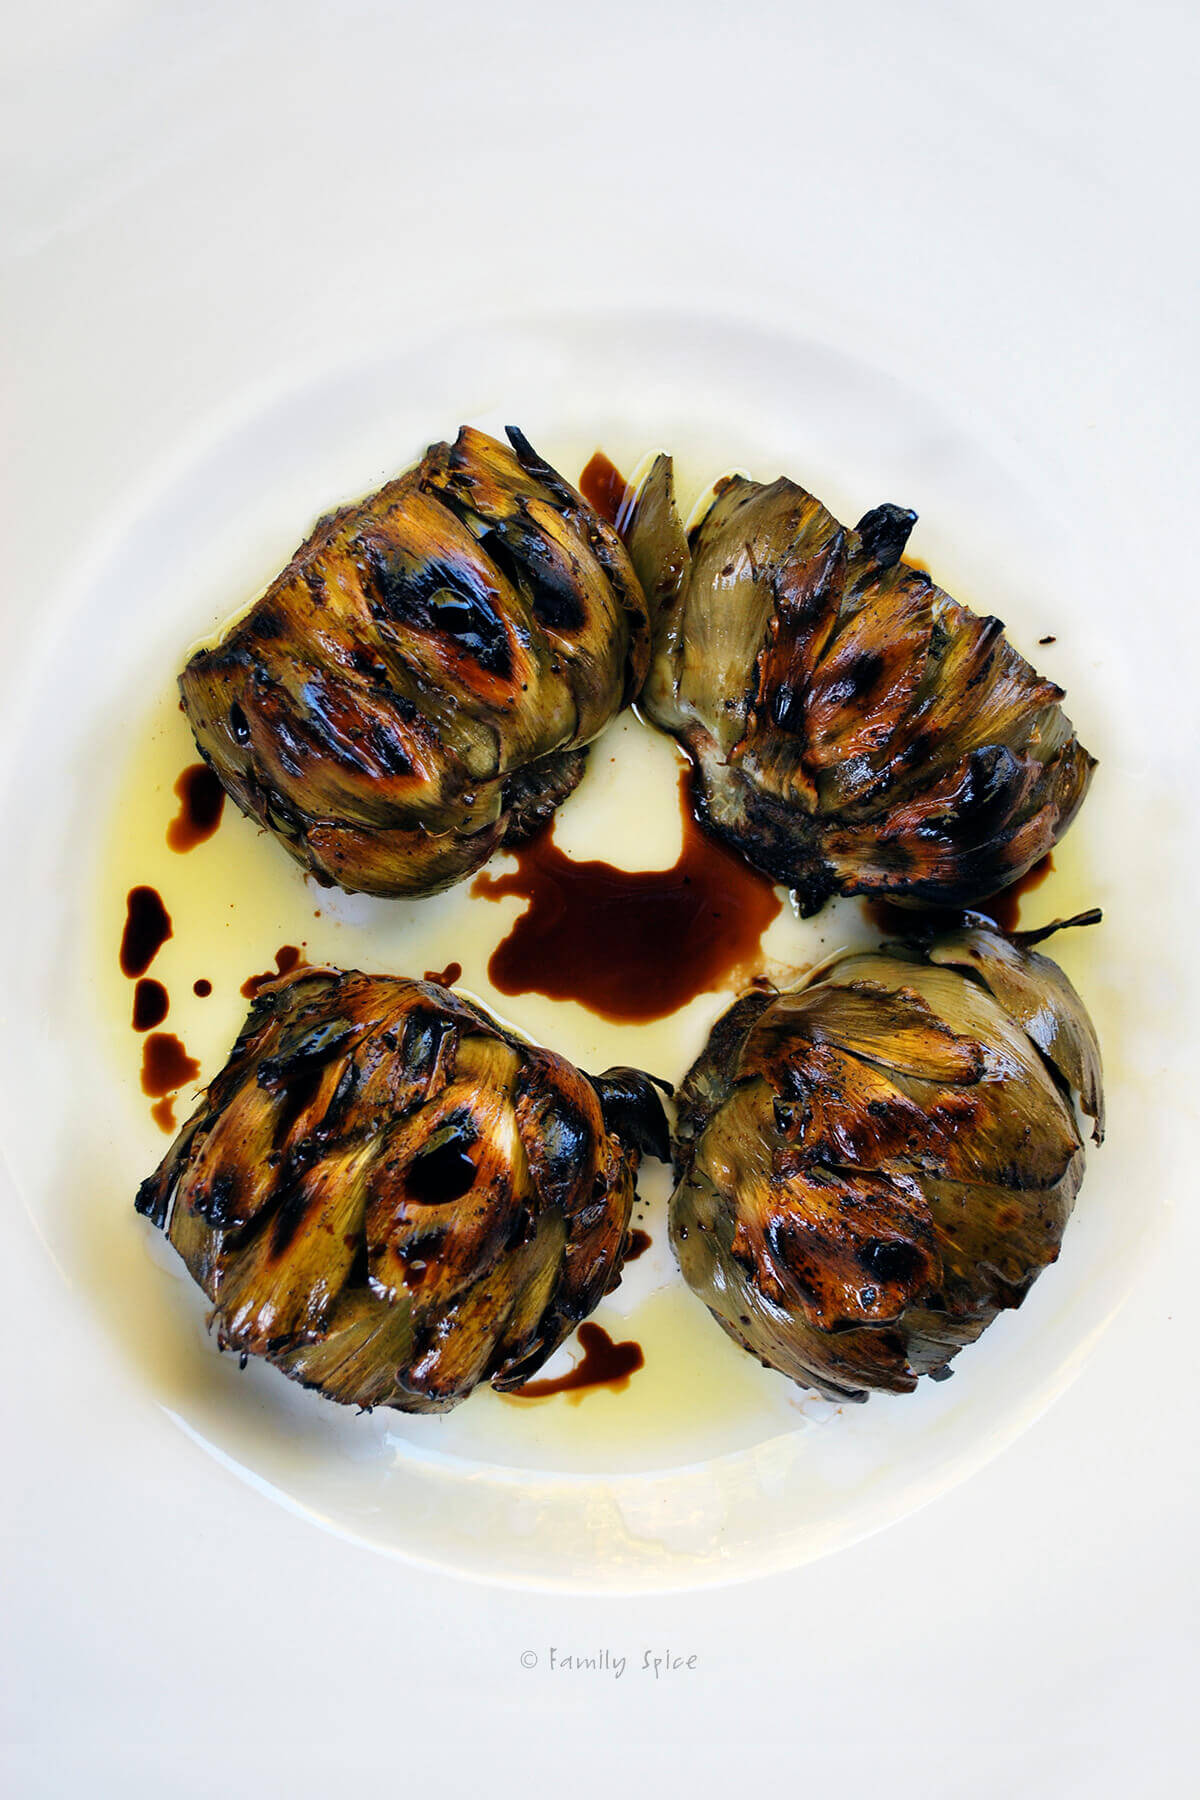 Top view of grilled artichokes on a white plate with balsamic vinegar and olive oil